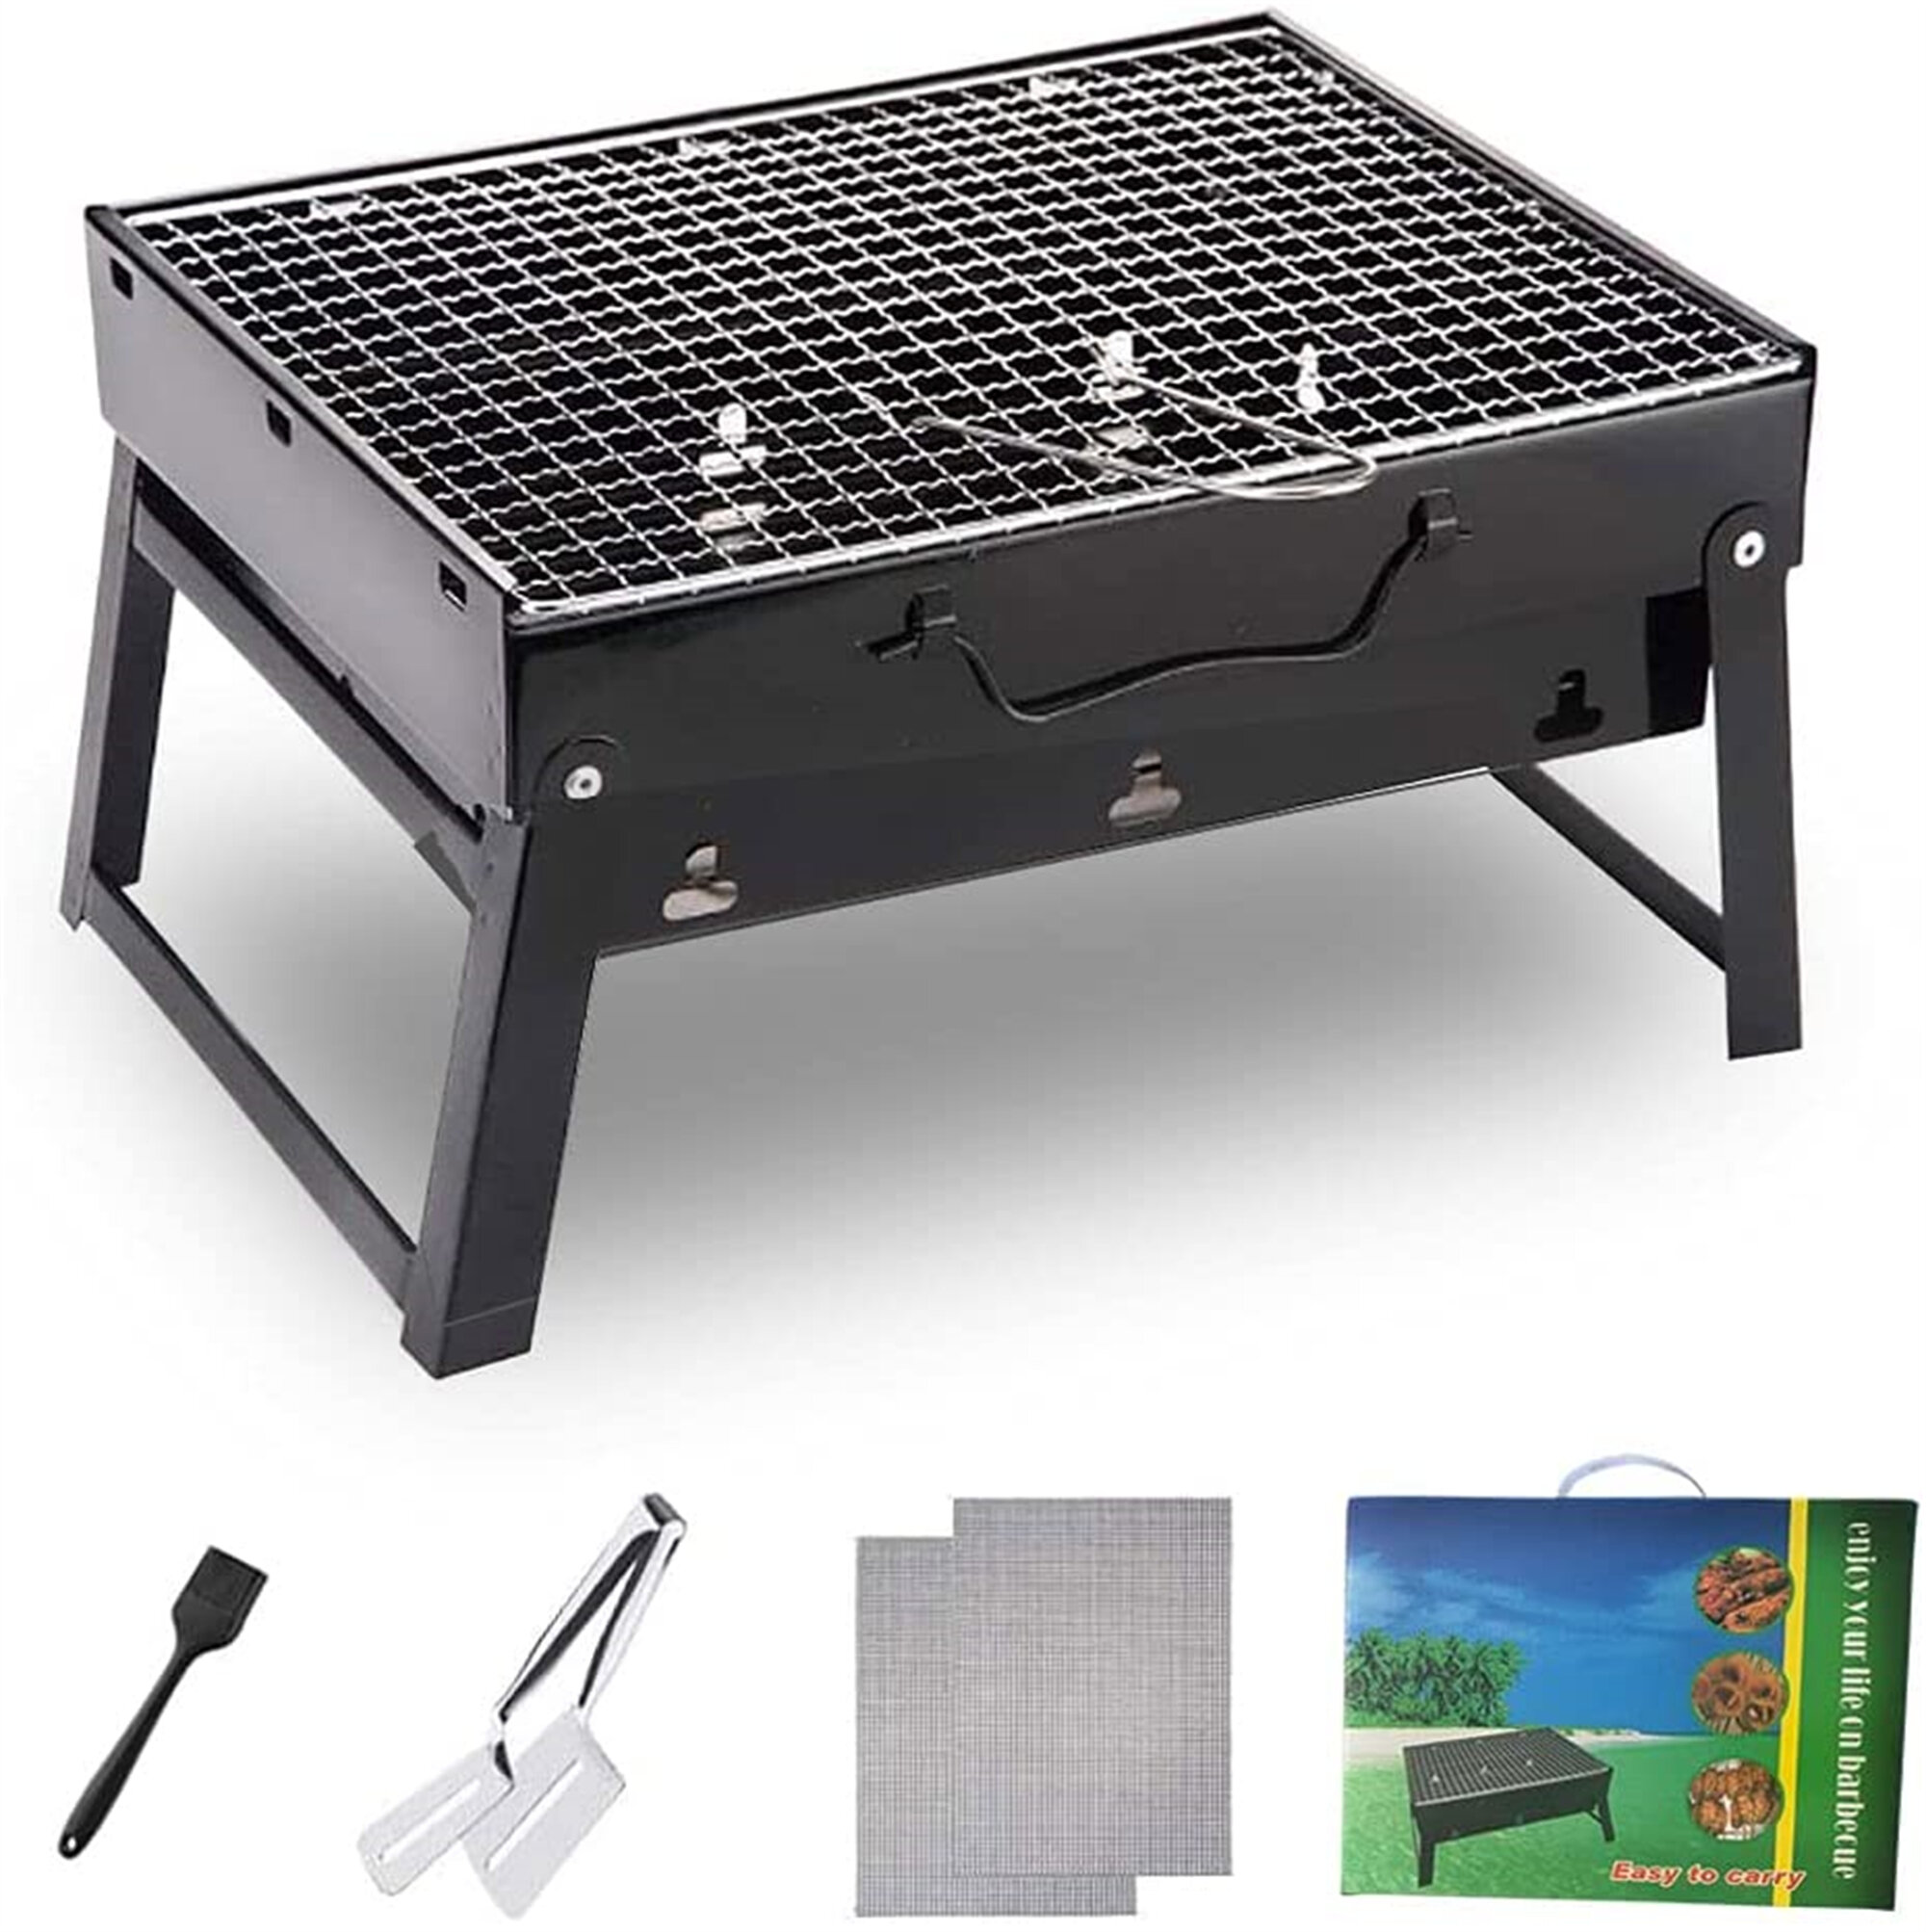 Beach Groundlevel Extra Large Folding Portable BBQ & Grill Ideal For Family Parties Easy Open & Fold Away Camping Day Out Picnics 